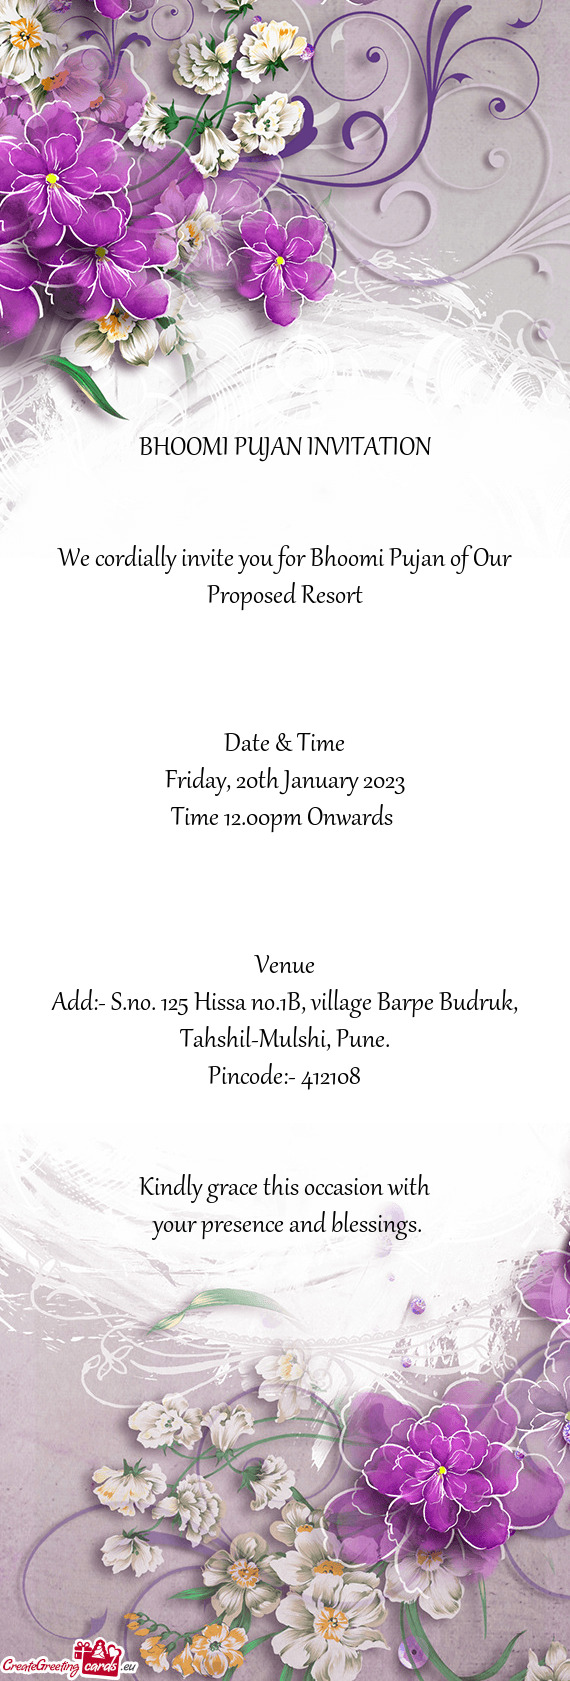 We cordially invite you for Bhoomi Pujan of Our Proposed Resort